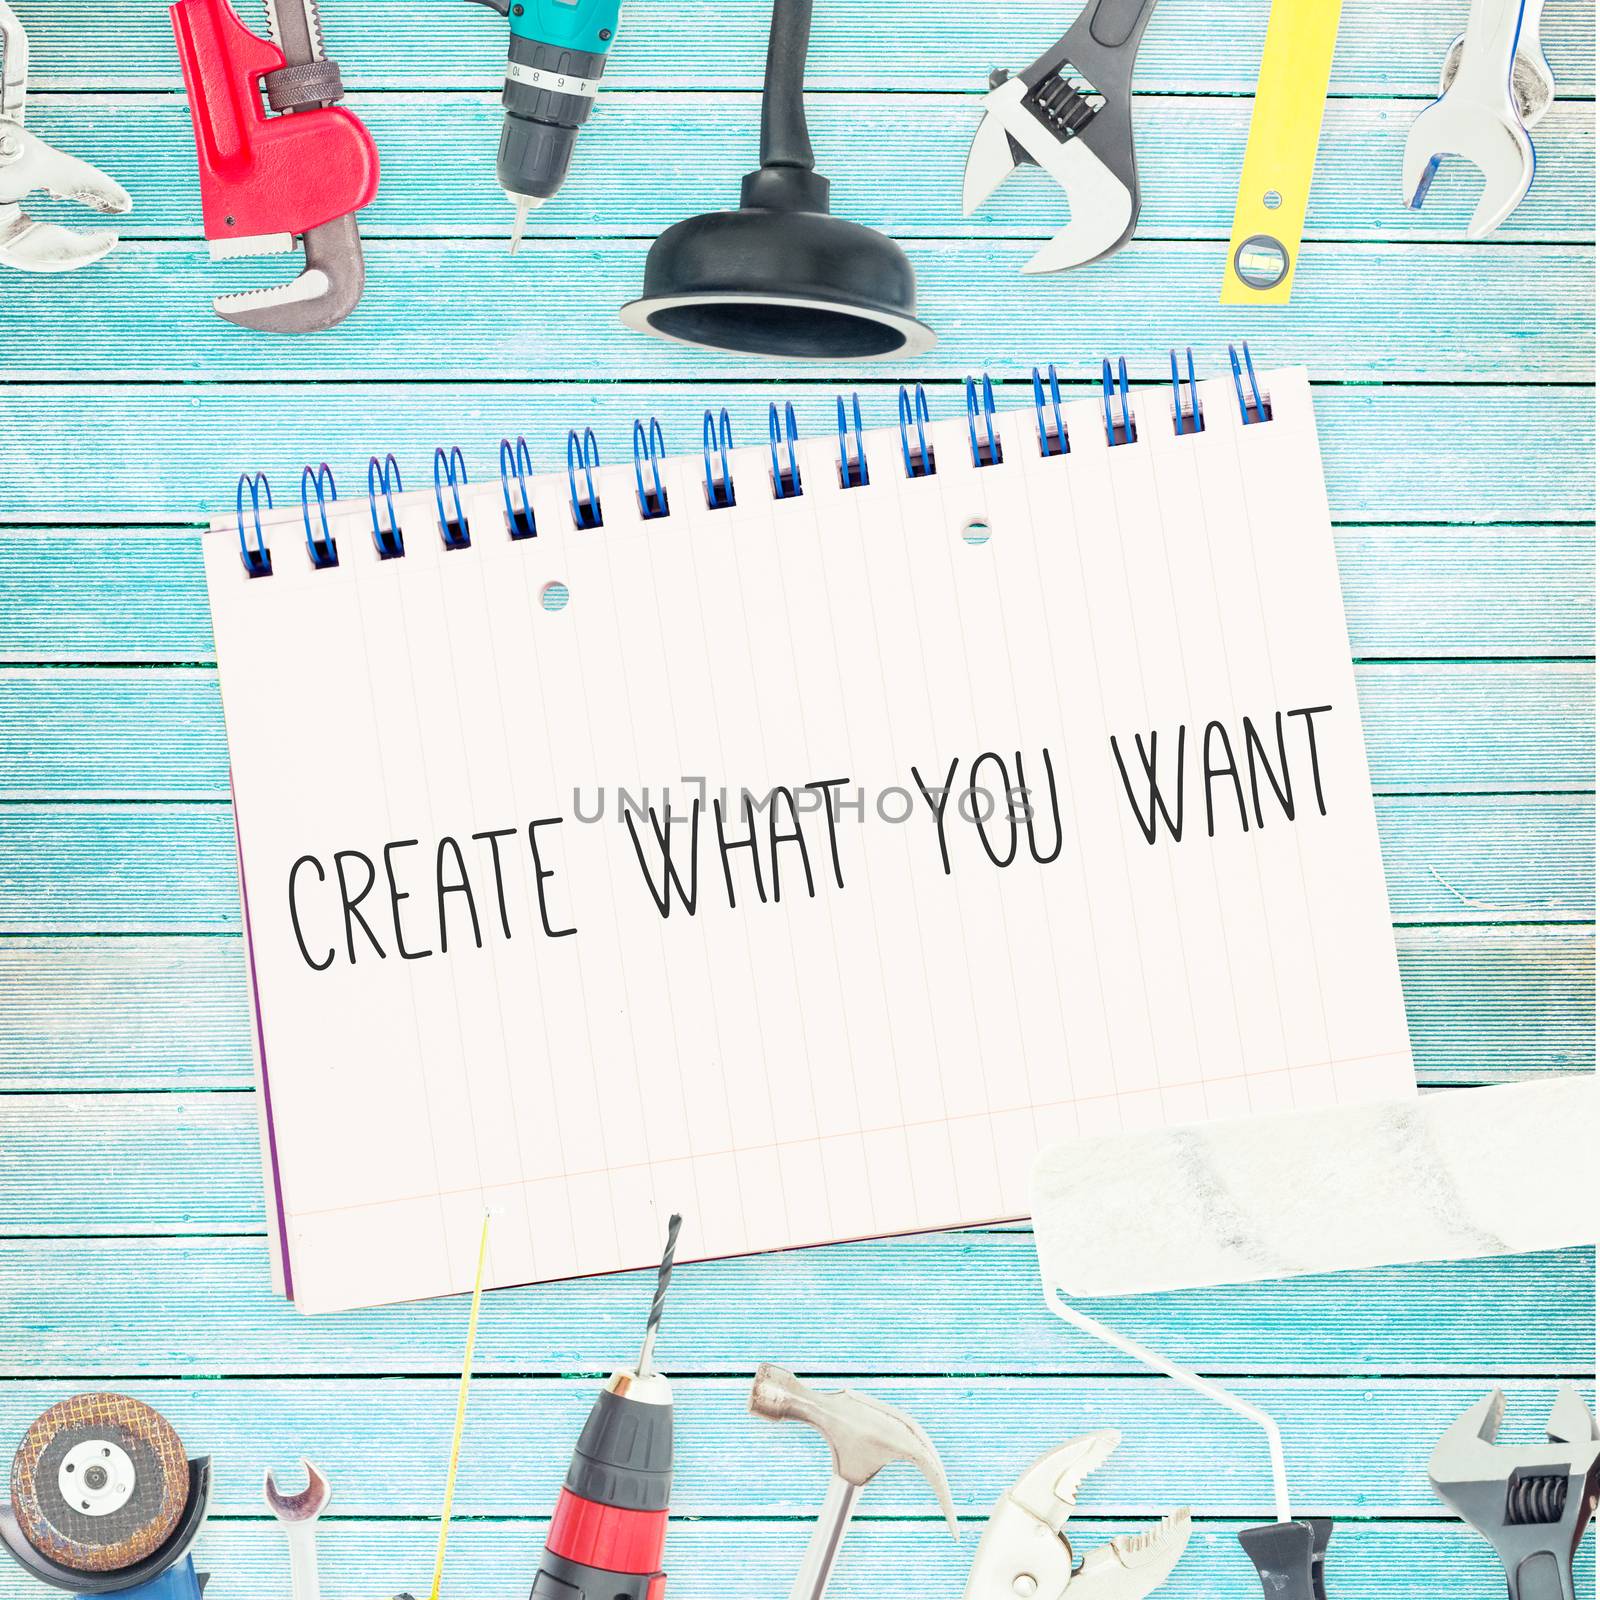 The word create what you want against tools and notepad on wooden background